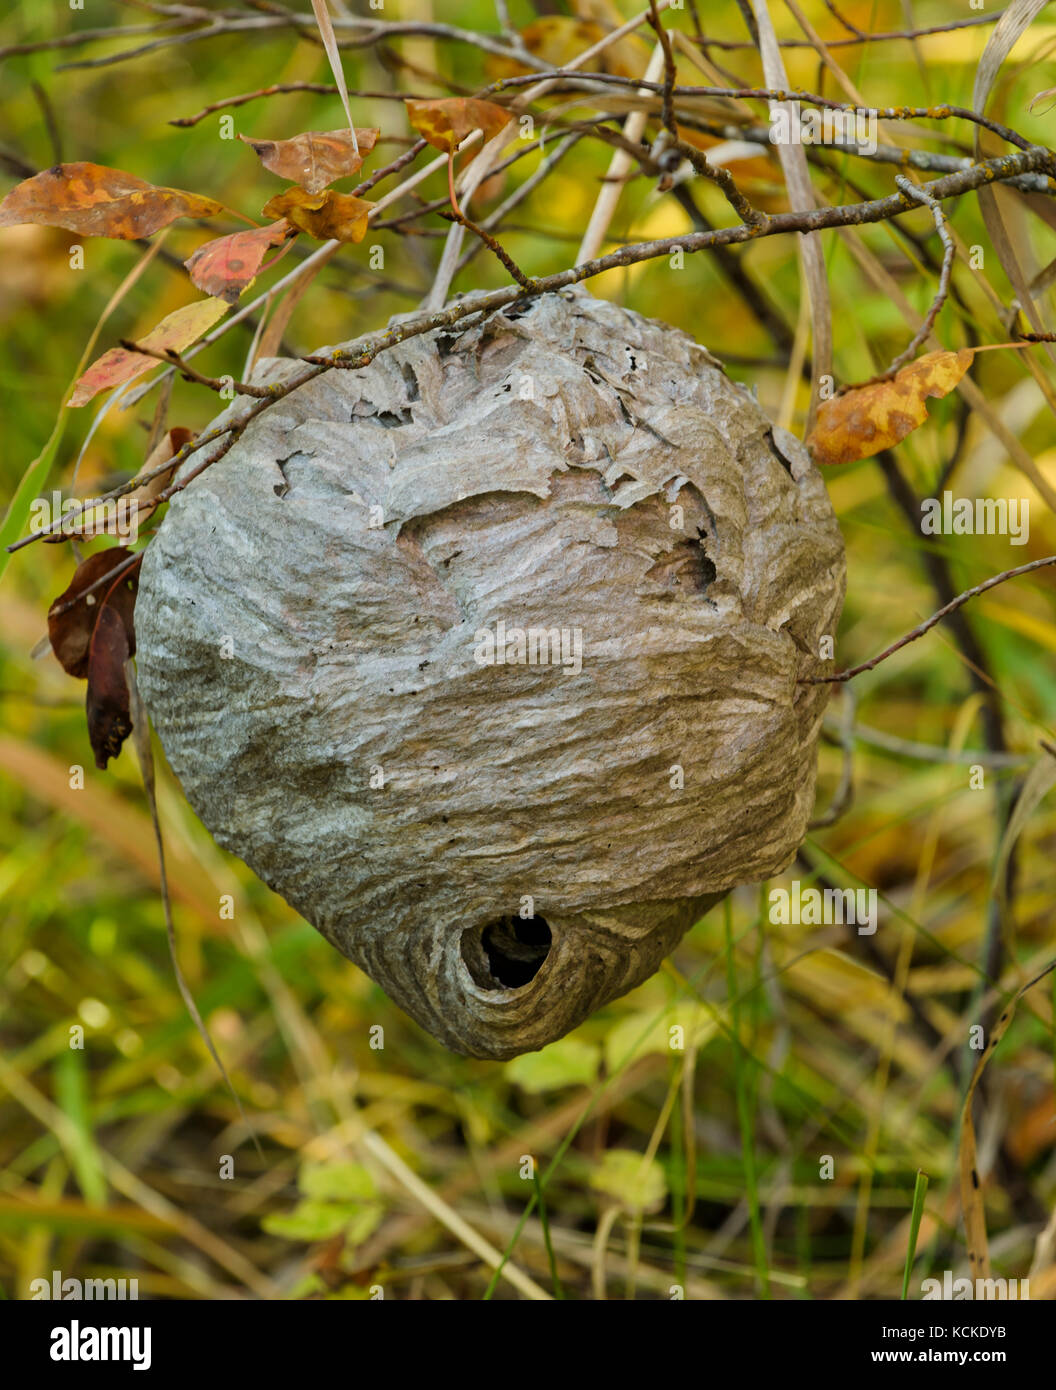 Nest of baldfaced hornet, Dolichovespula maculata, located about 1 meter (3 ft) above ground in brushy area.  Autumn near Kalispell, Montana. Stock Photo